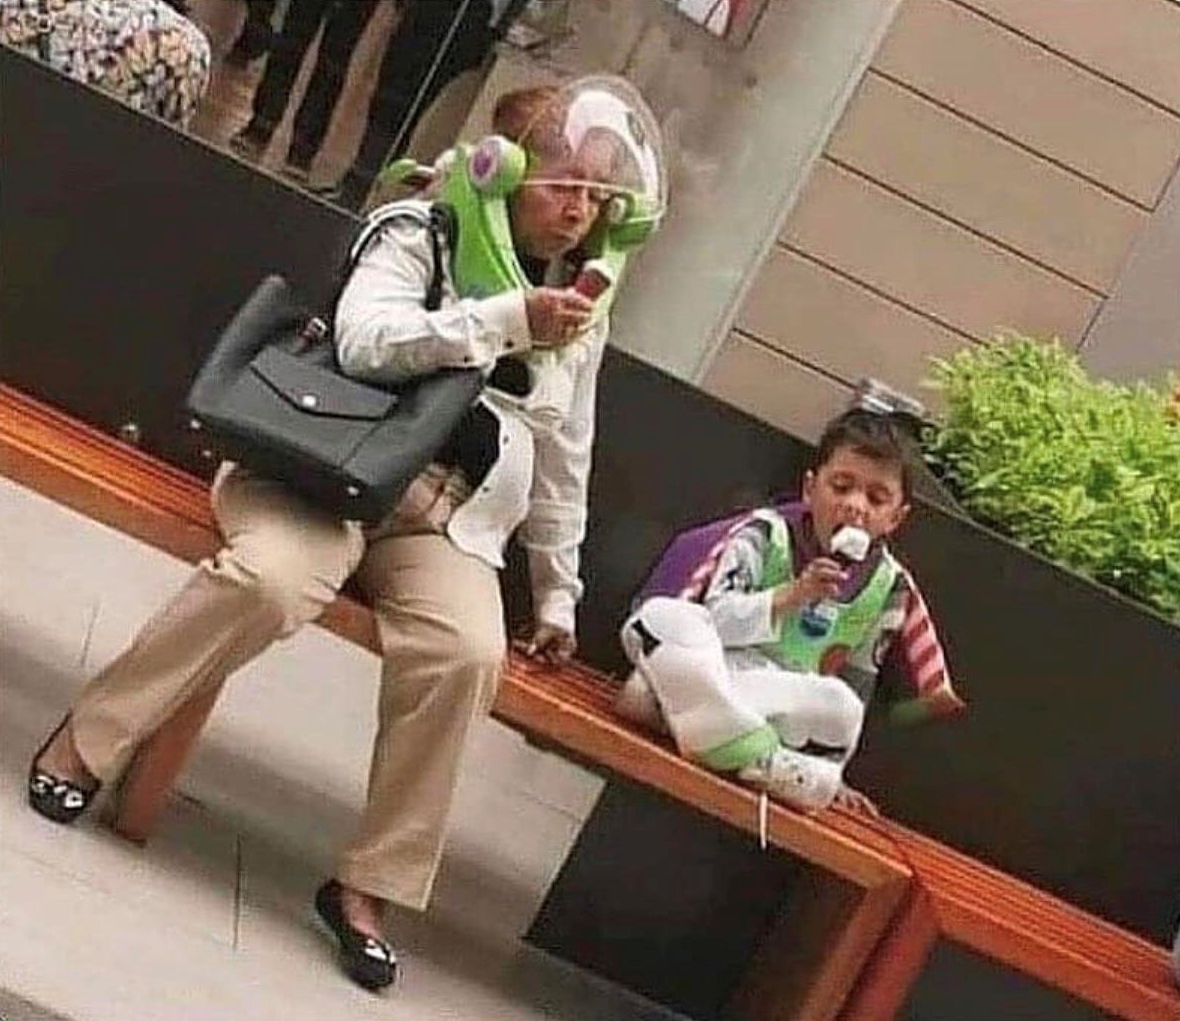 a grandma and her grandson each dressed like buzz lightyear from the animated film, toy story. while they sit on a bench and eat ice cream cones